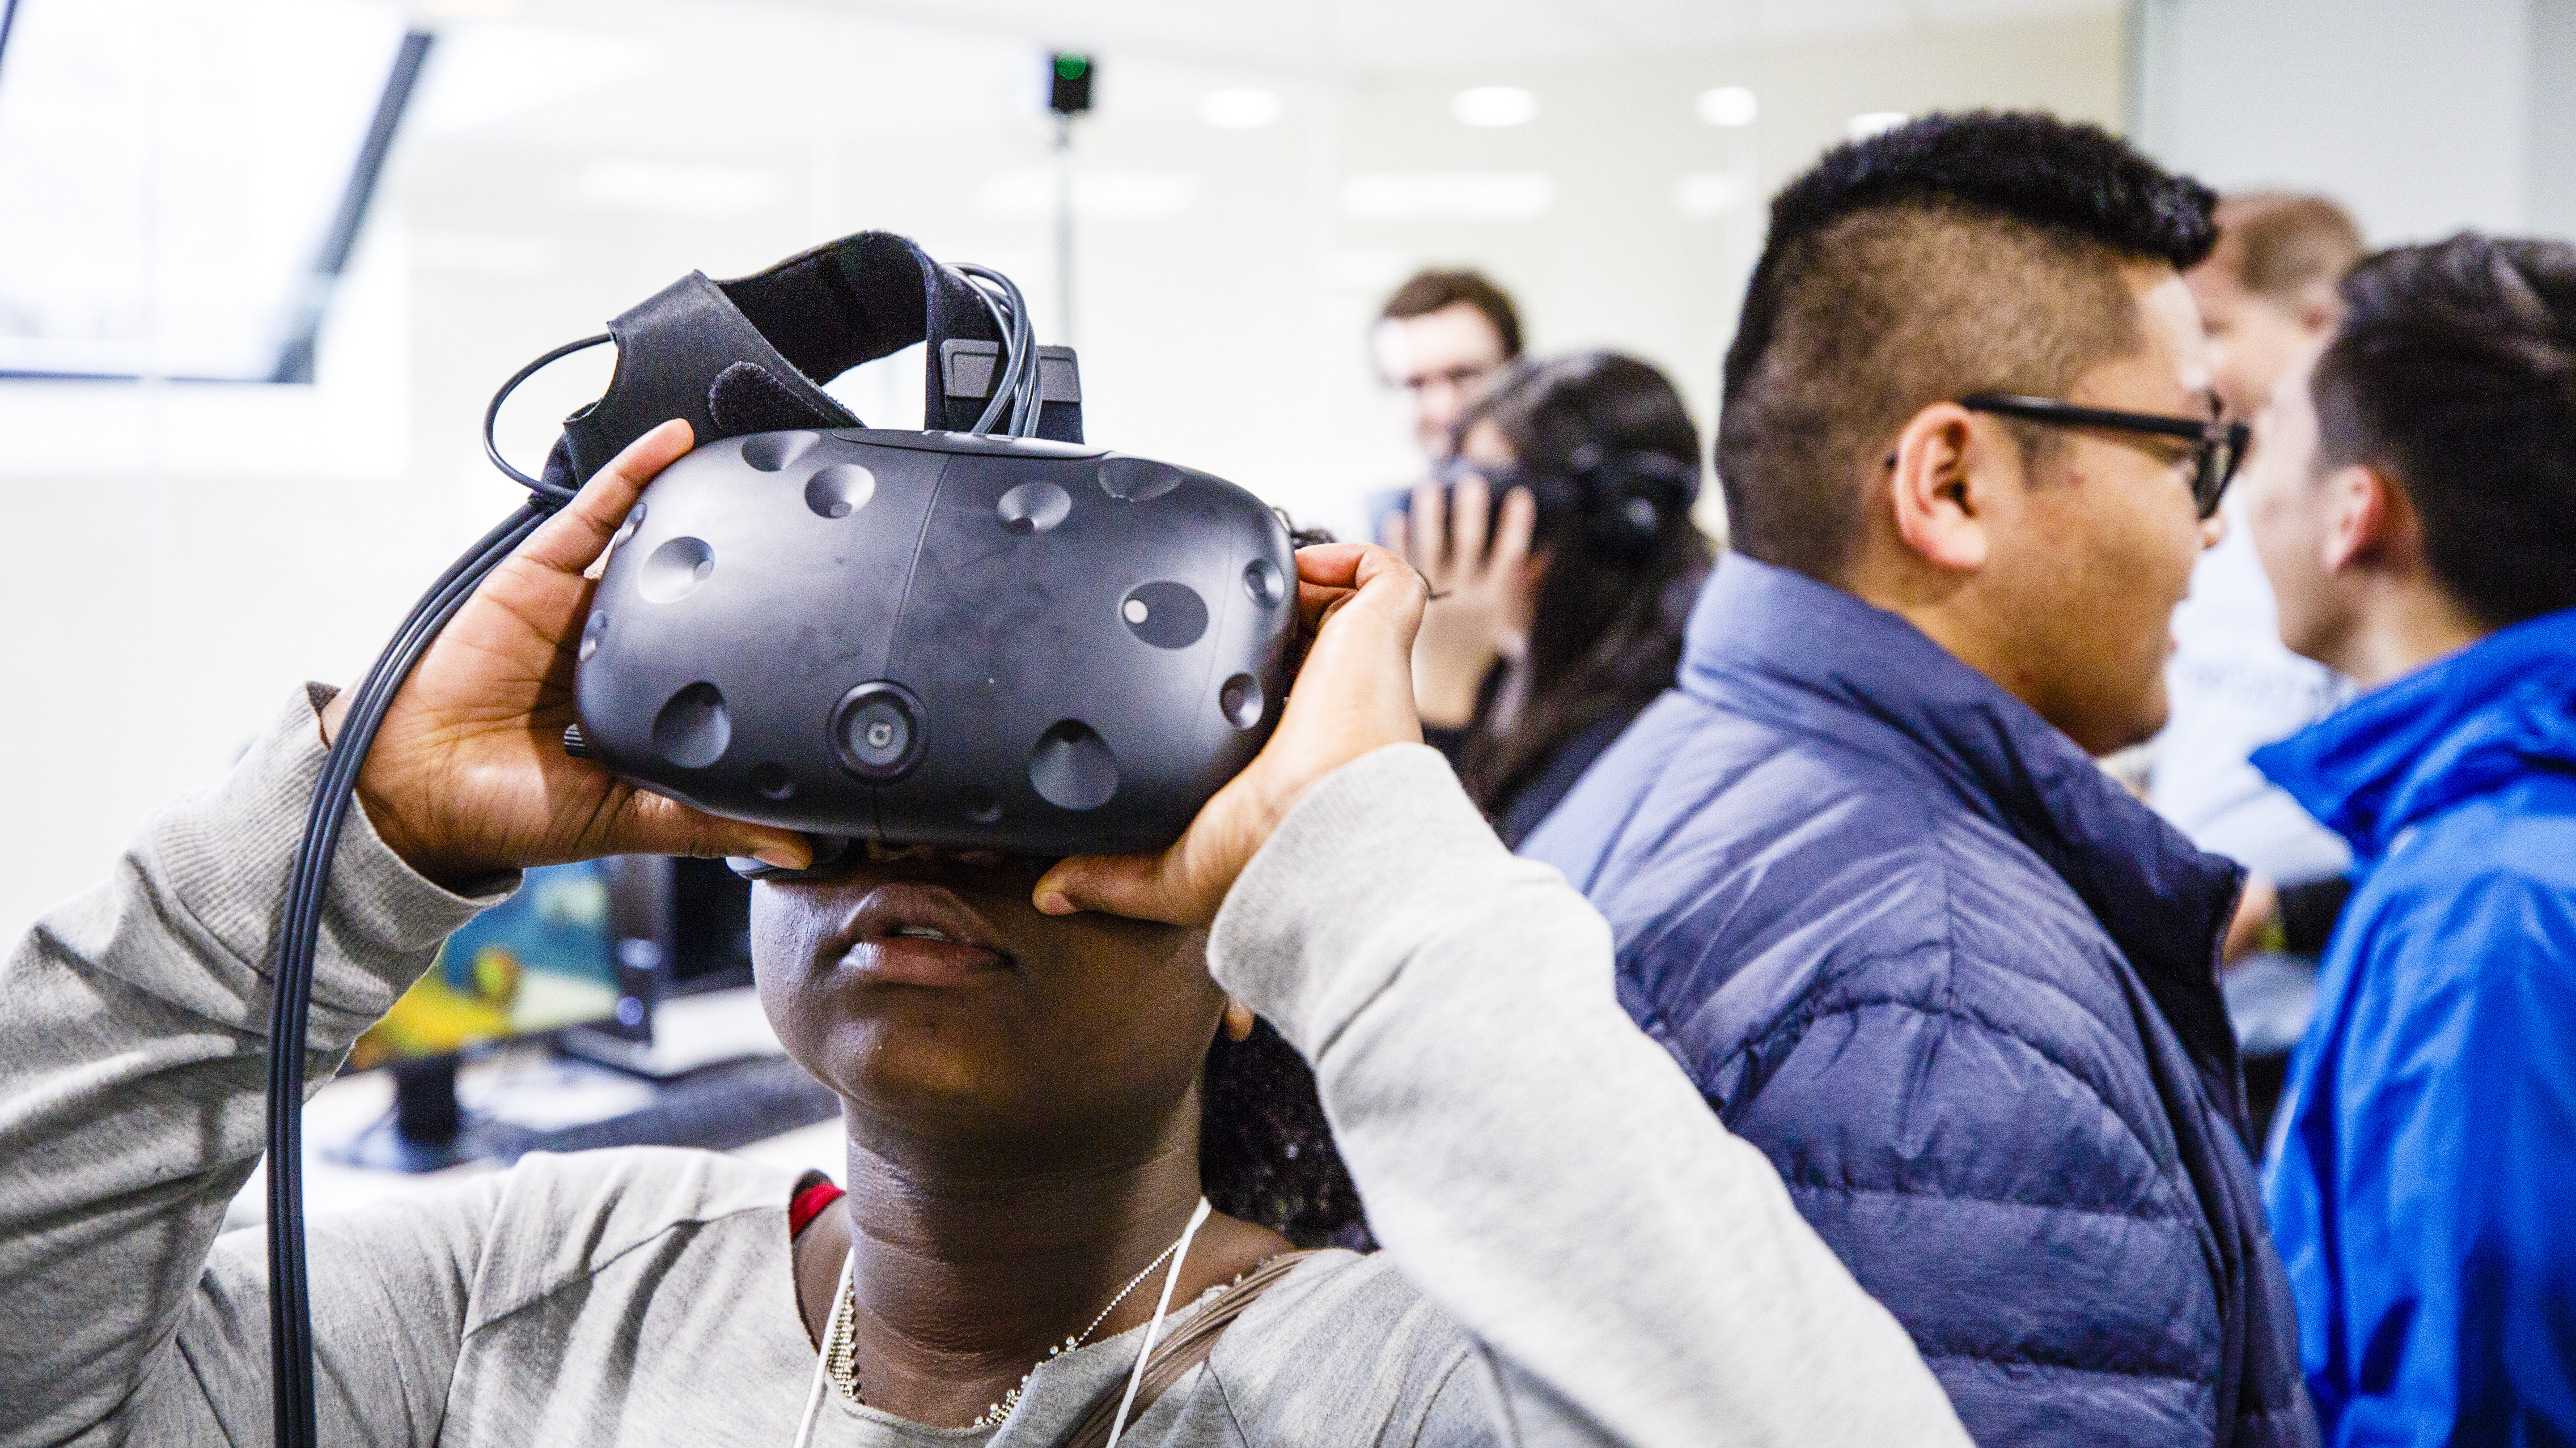 A student uses virtual reality at the Youth Digital Media Summit in February.